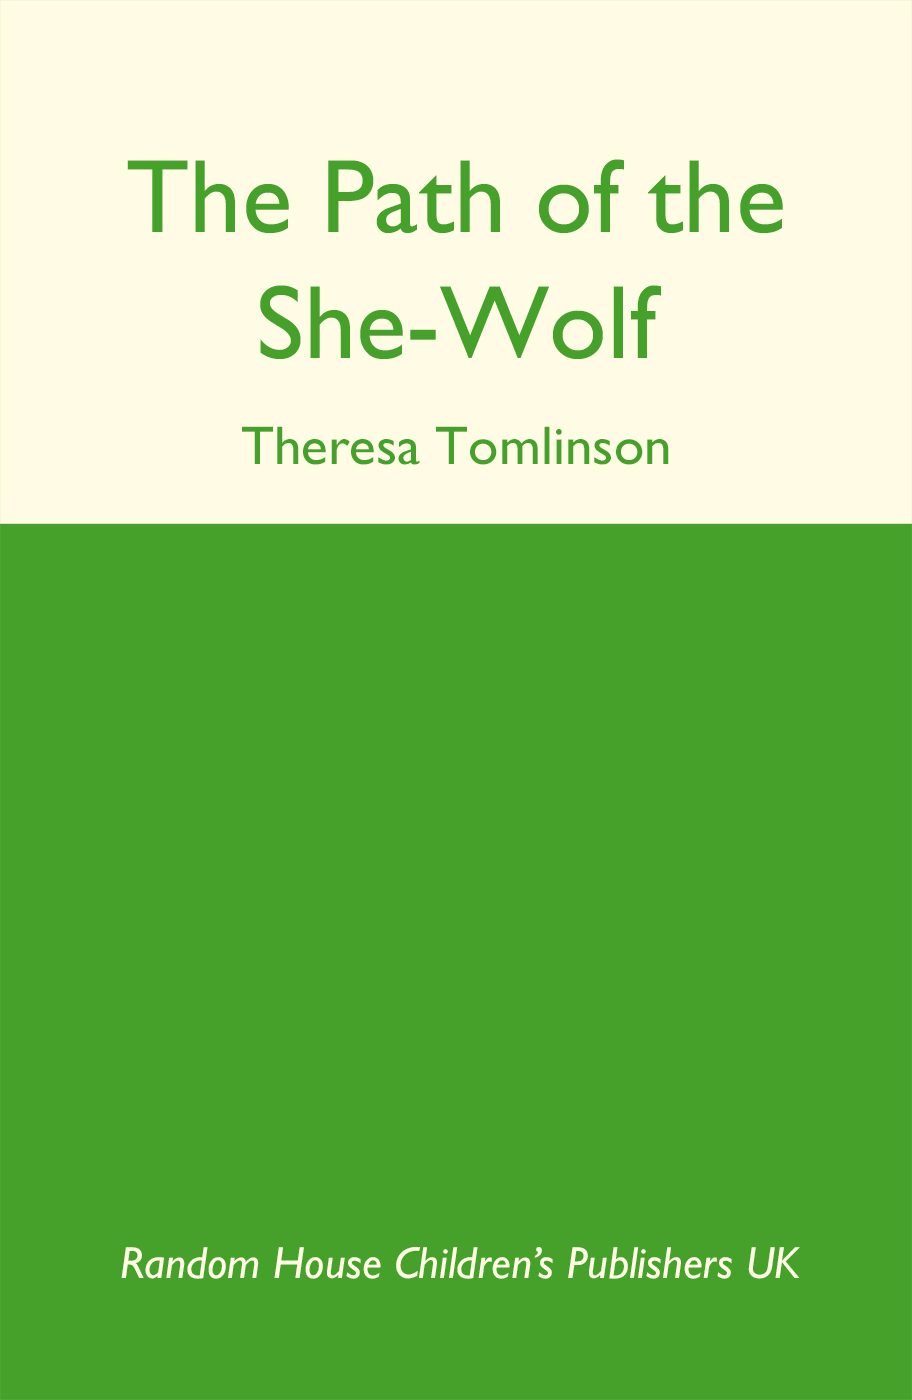 Path of the She Wolf by Theresa Tomlinson